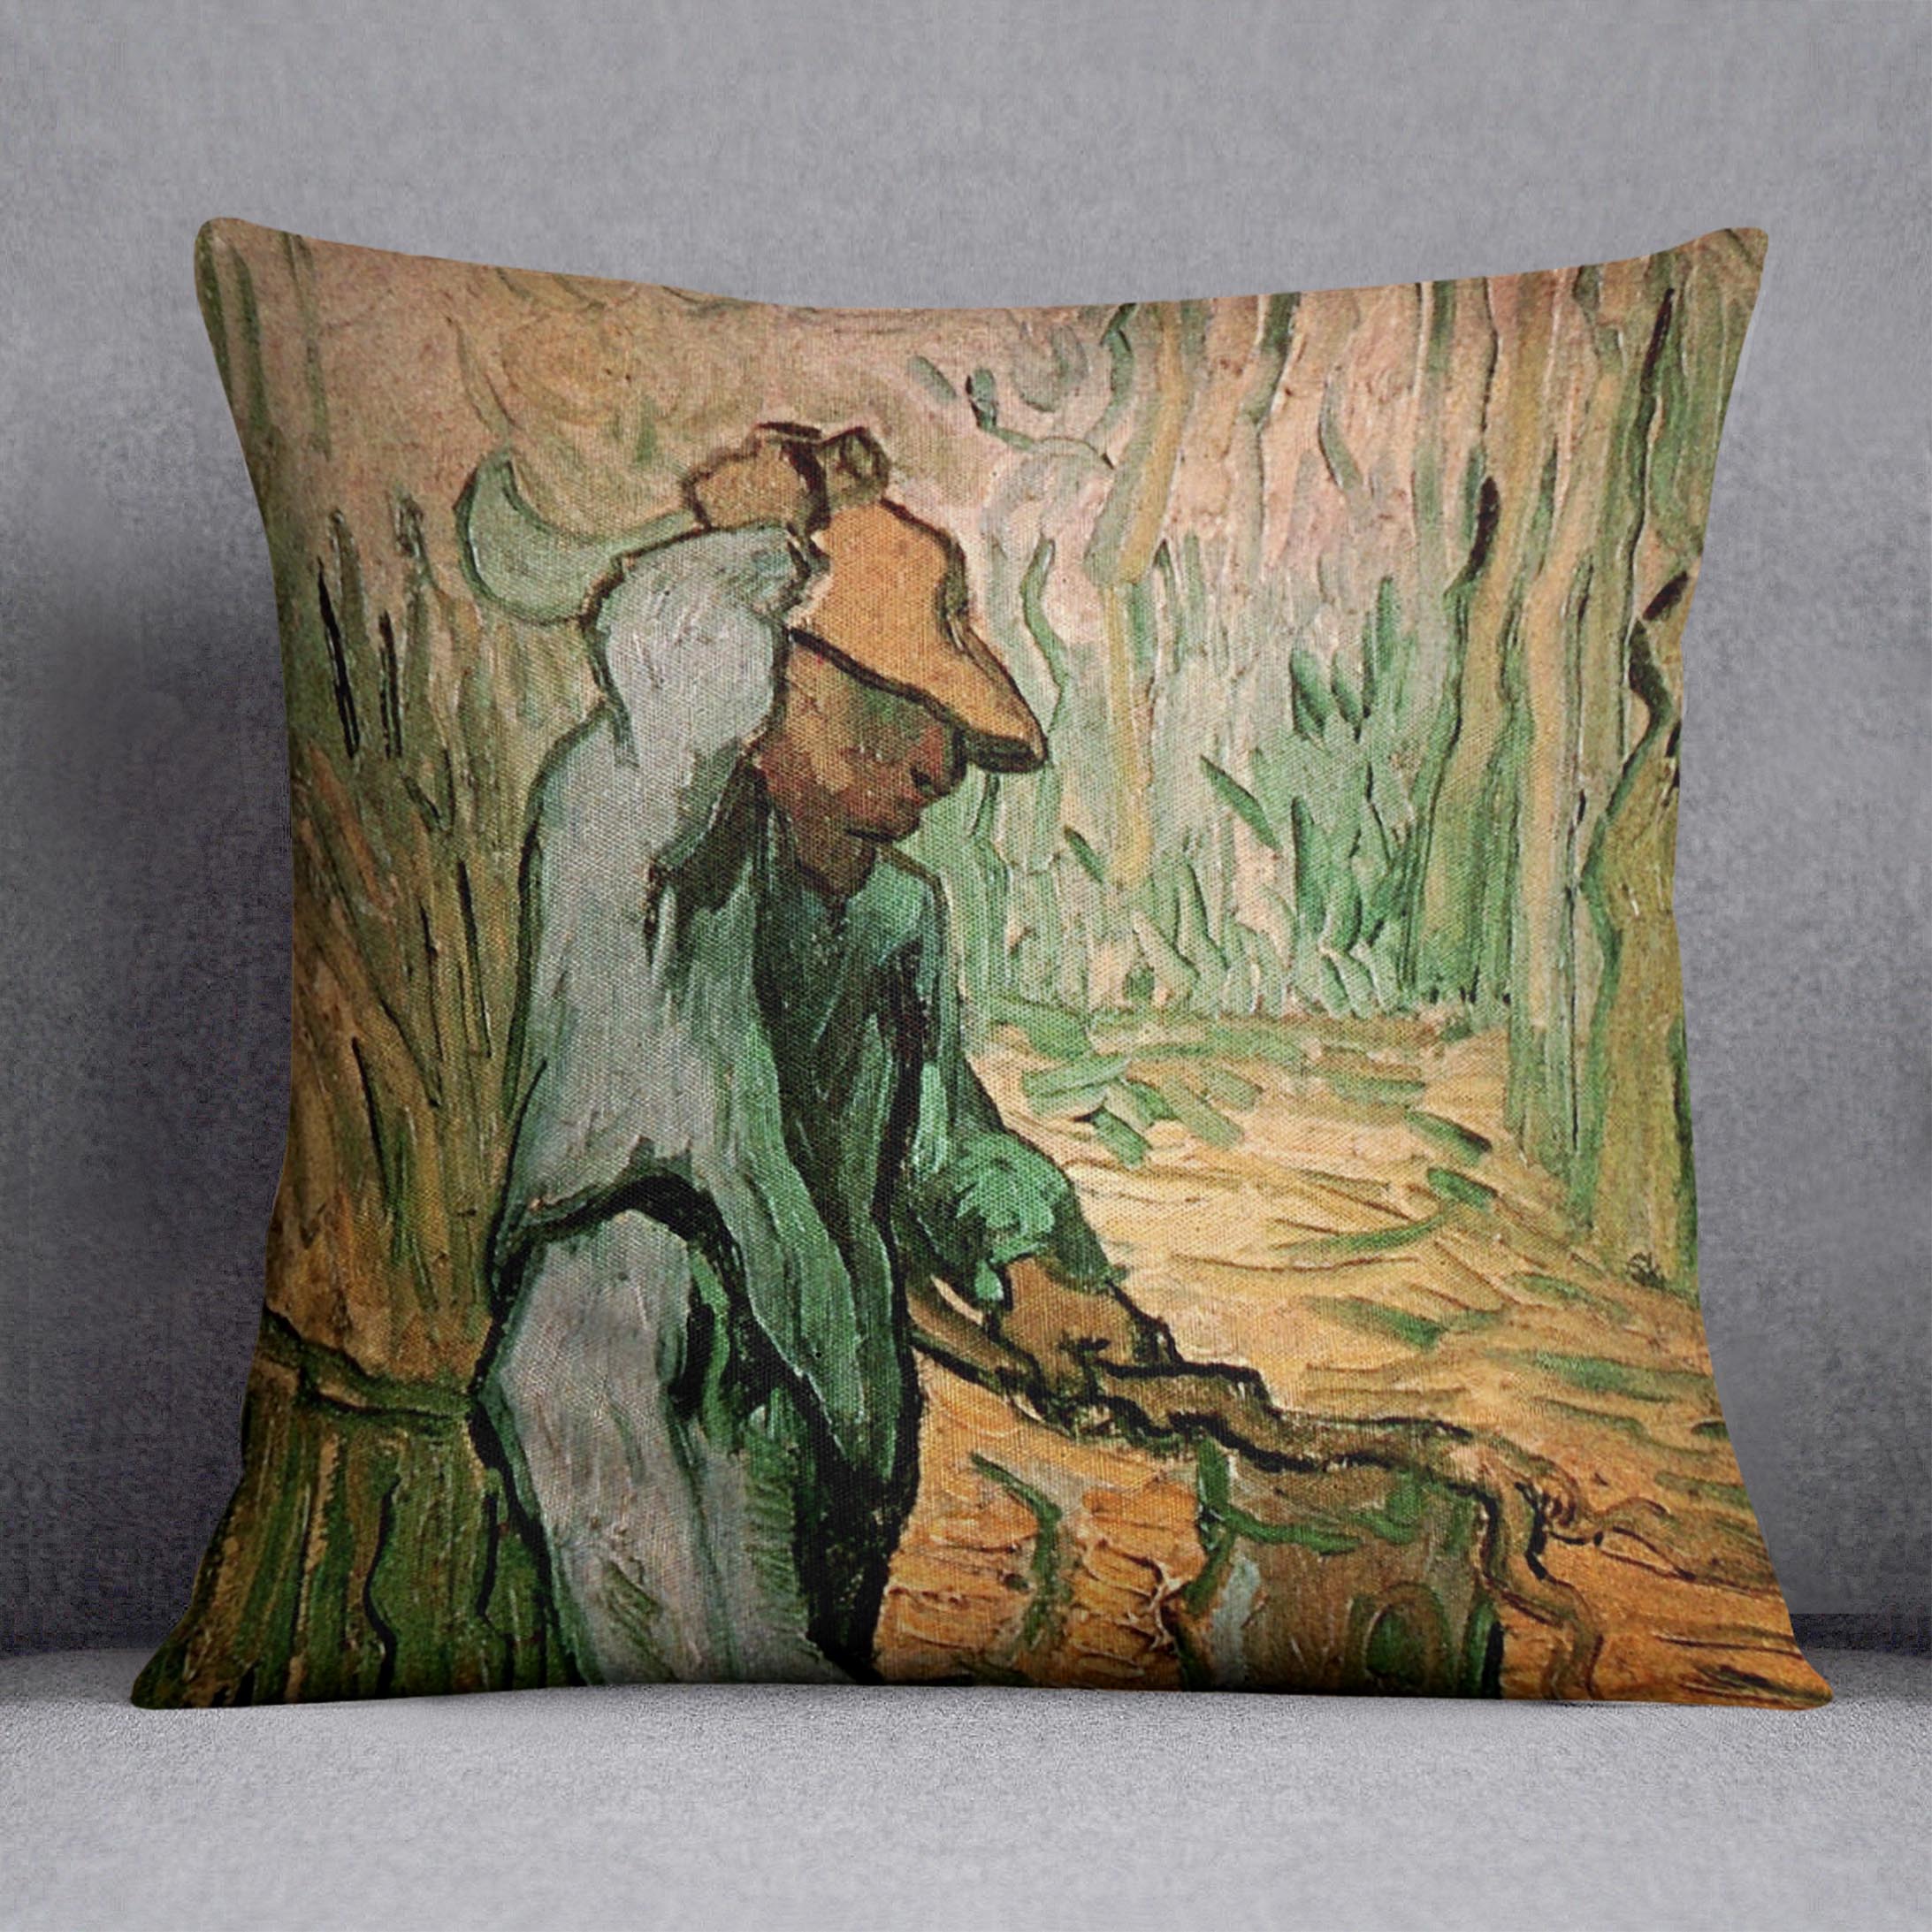 The Woodcutter after Millet by Van Gogh Cushion